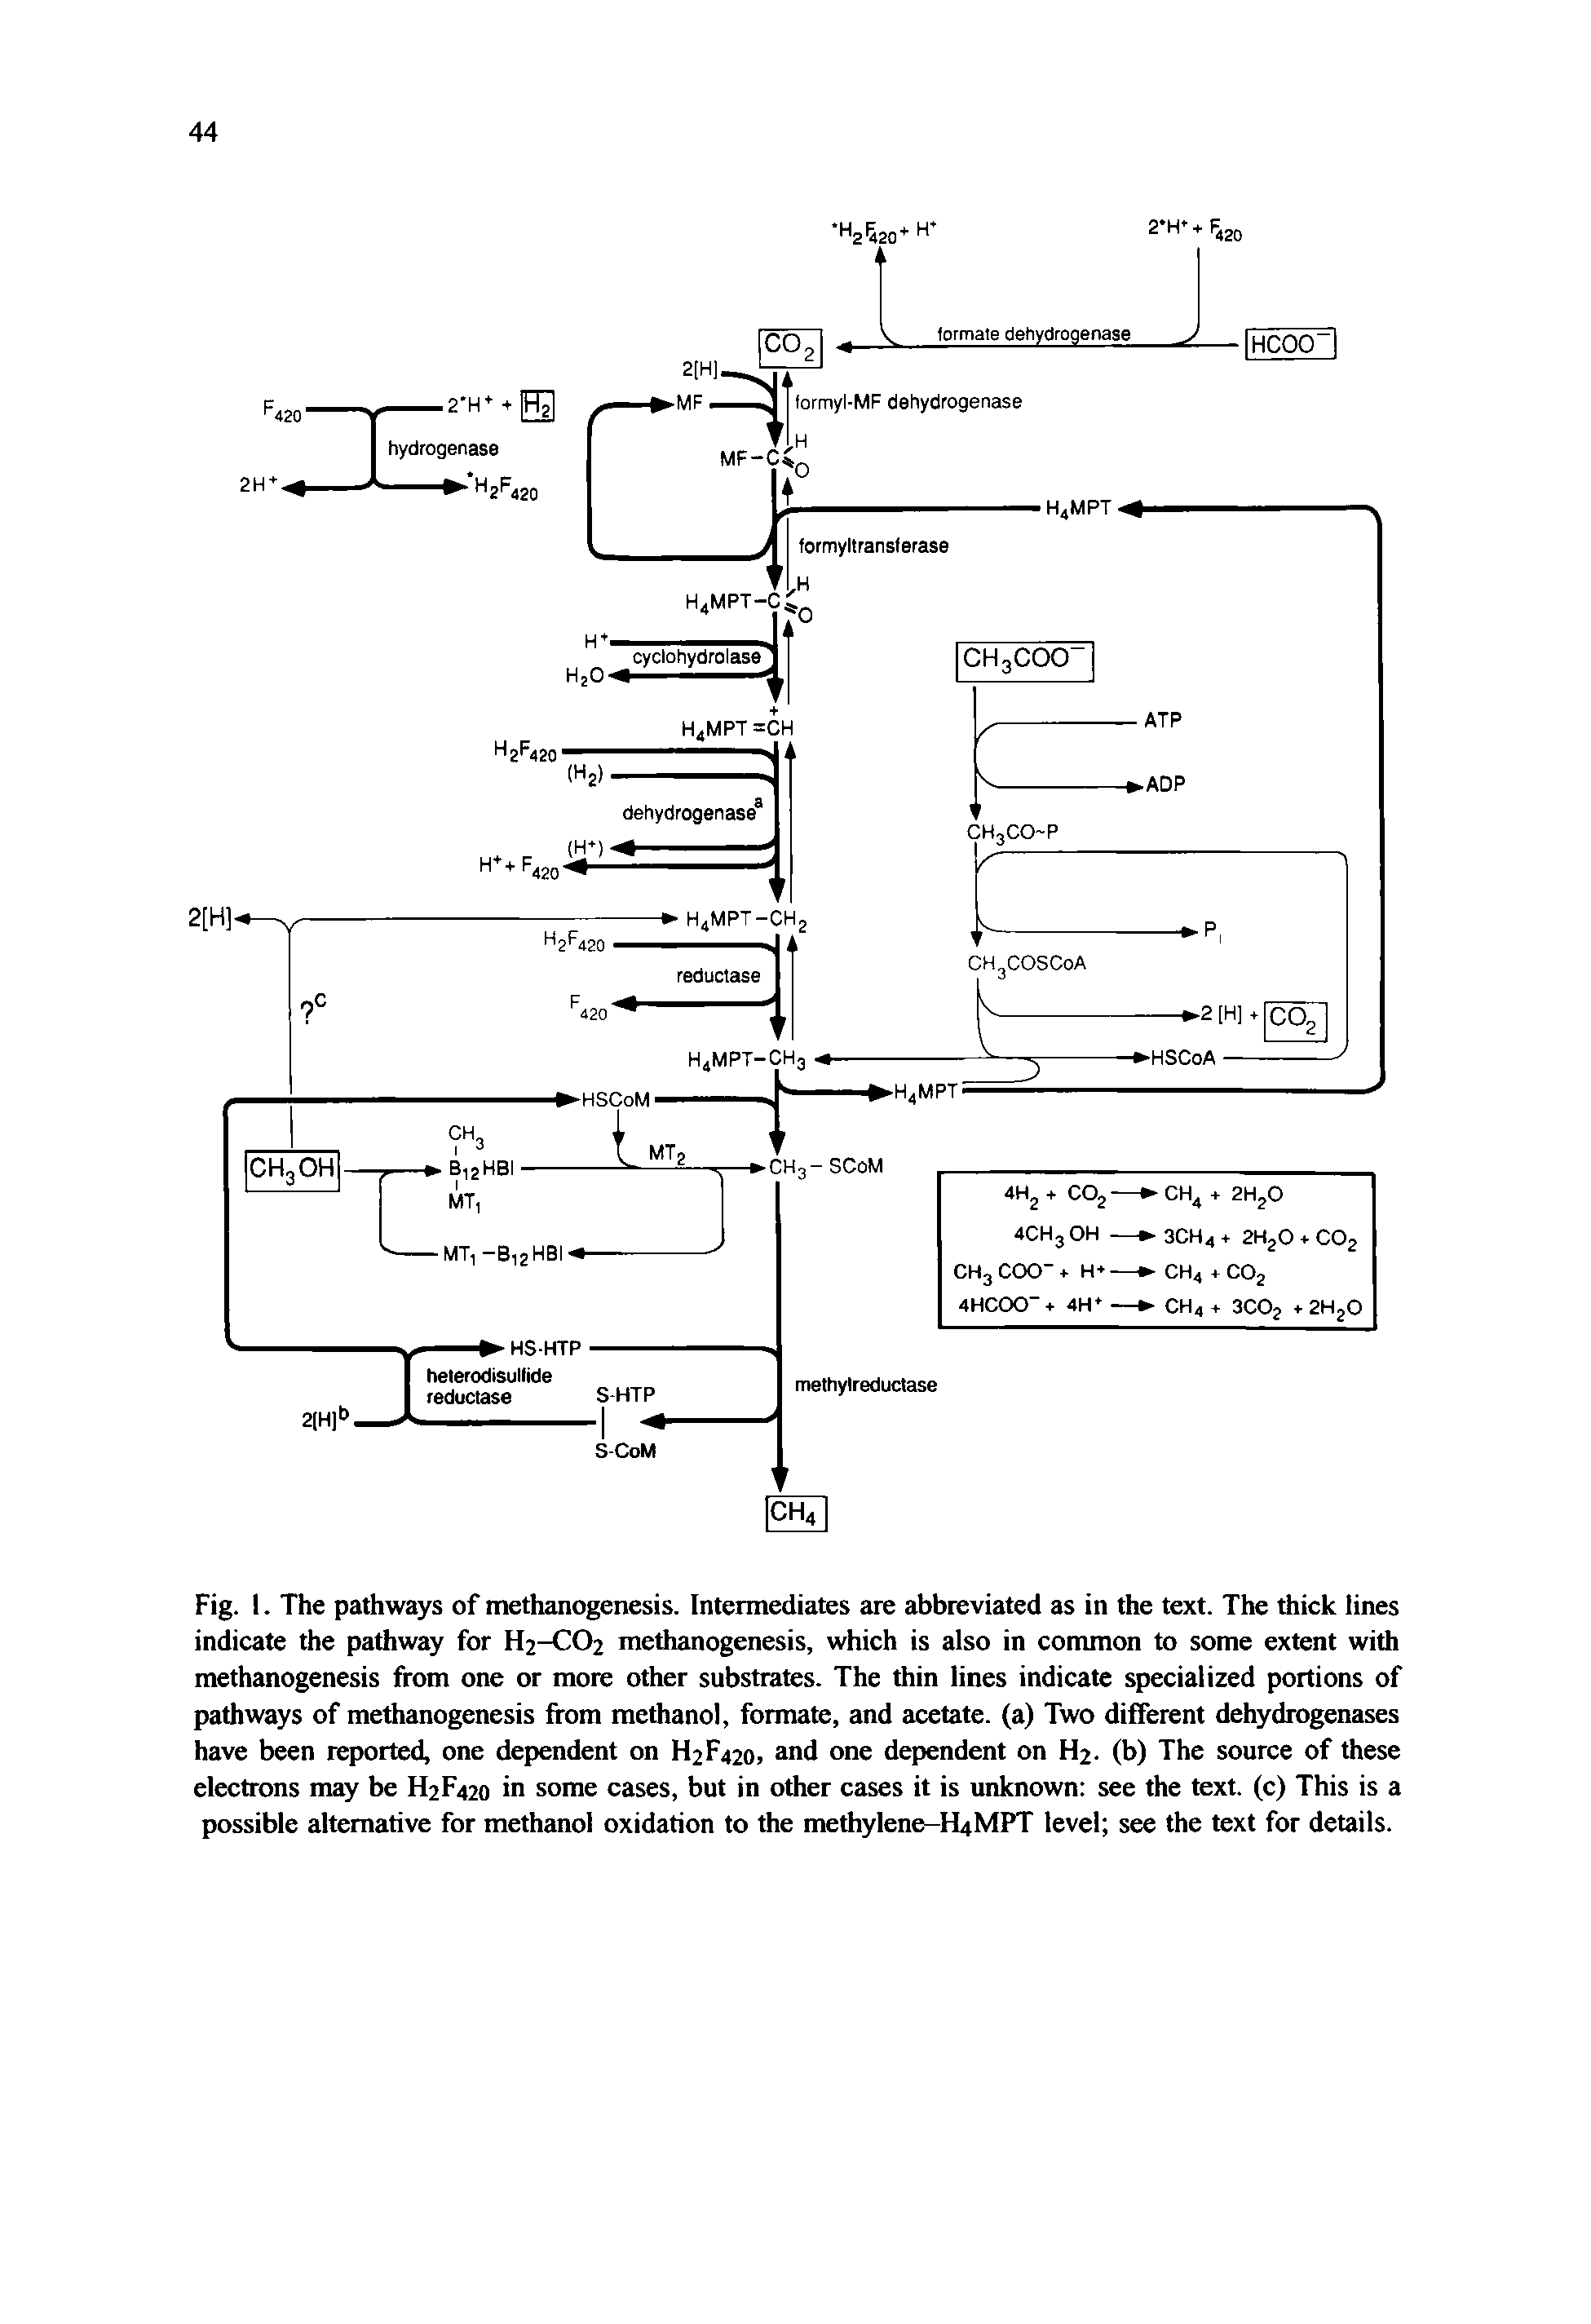 Fig. 1. The pathways of methanogenesis. Intermediates are abbreviated as in the text. The thick lines indicate the pathway for H2-CO2 methanogenesis, which is also in common to some extent with methanogenesis from one or more other substrates. The thin lines indicate specialized portions of pathways of methanogenesis from methanol, formate, and acetate, (a) Two different dehydrogenases have been reported, one dependent on H2F420, and one dependent on H2. (b) The source of these electrons may be H2F420 in some cases, but in other cases it is unknown see the text, (c) This is a possible alternative for methanol oxidation to the methylene-RjMPT level see the text for details.